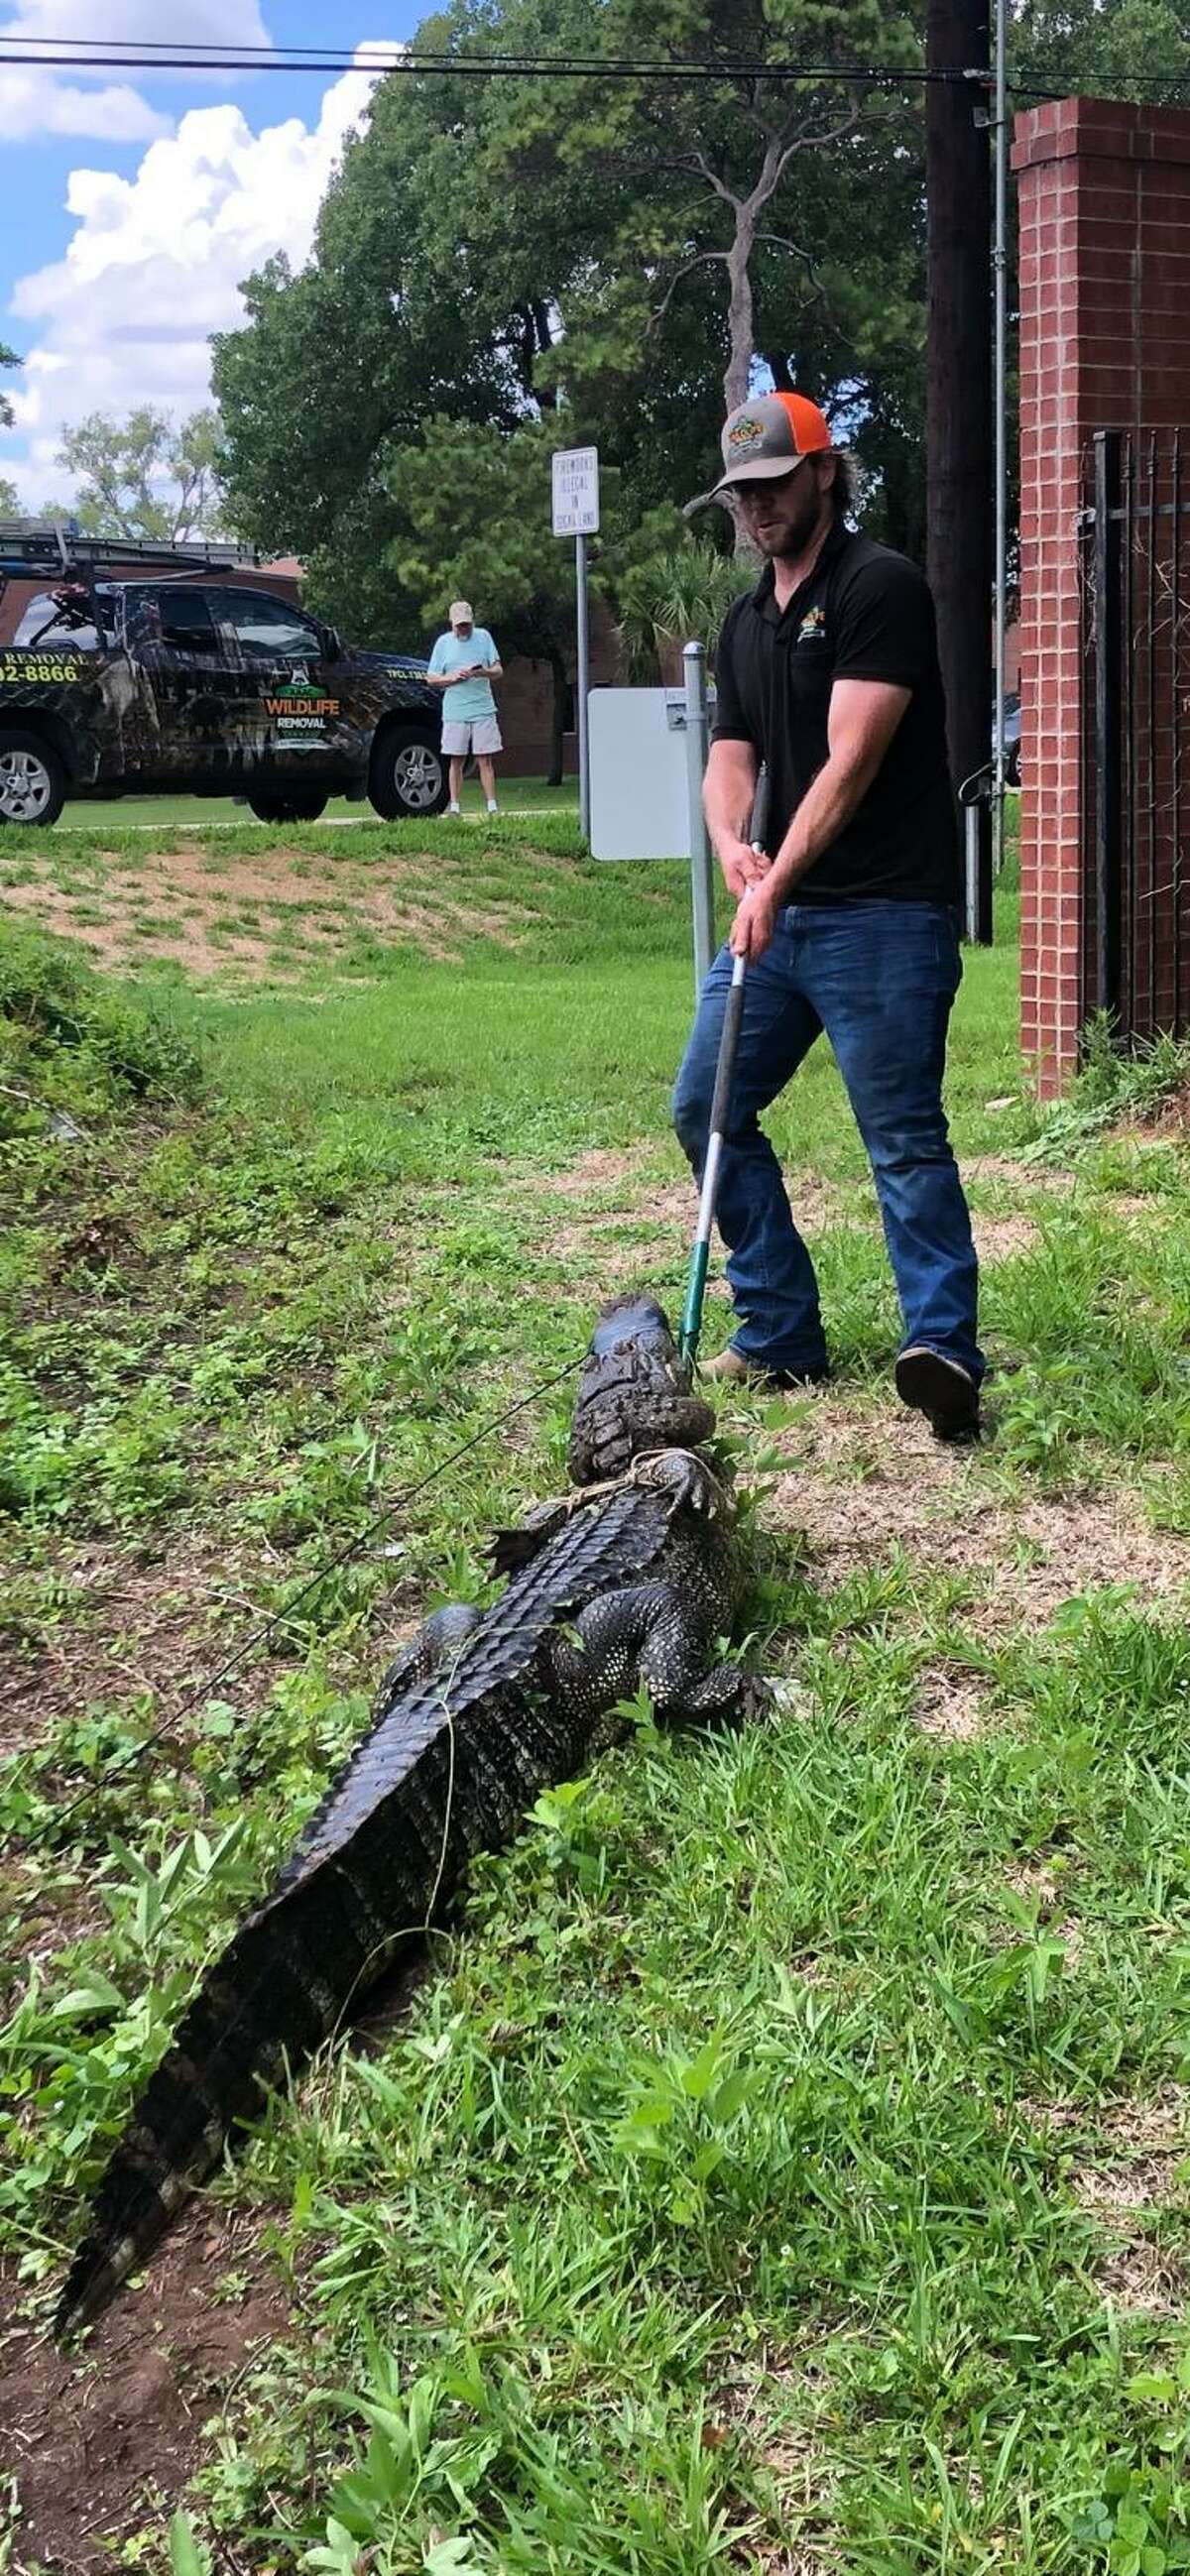 First Colony's Homeowners Association hired a trapper who caught and relocated an alligator they believe attacked a rower's boat.